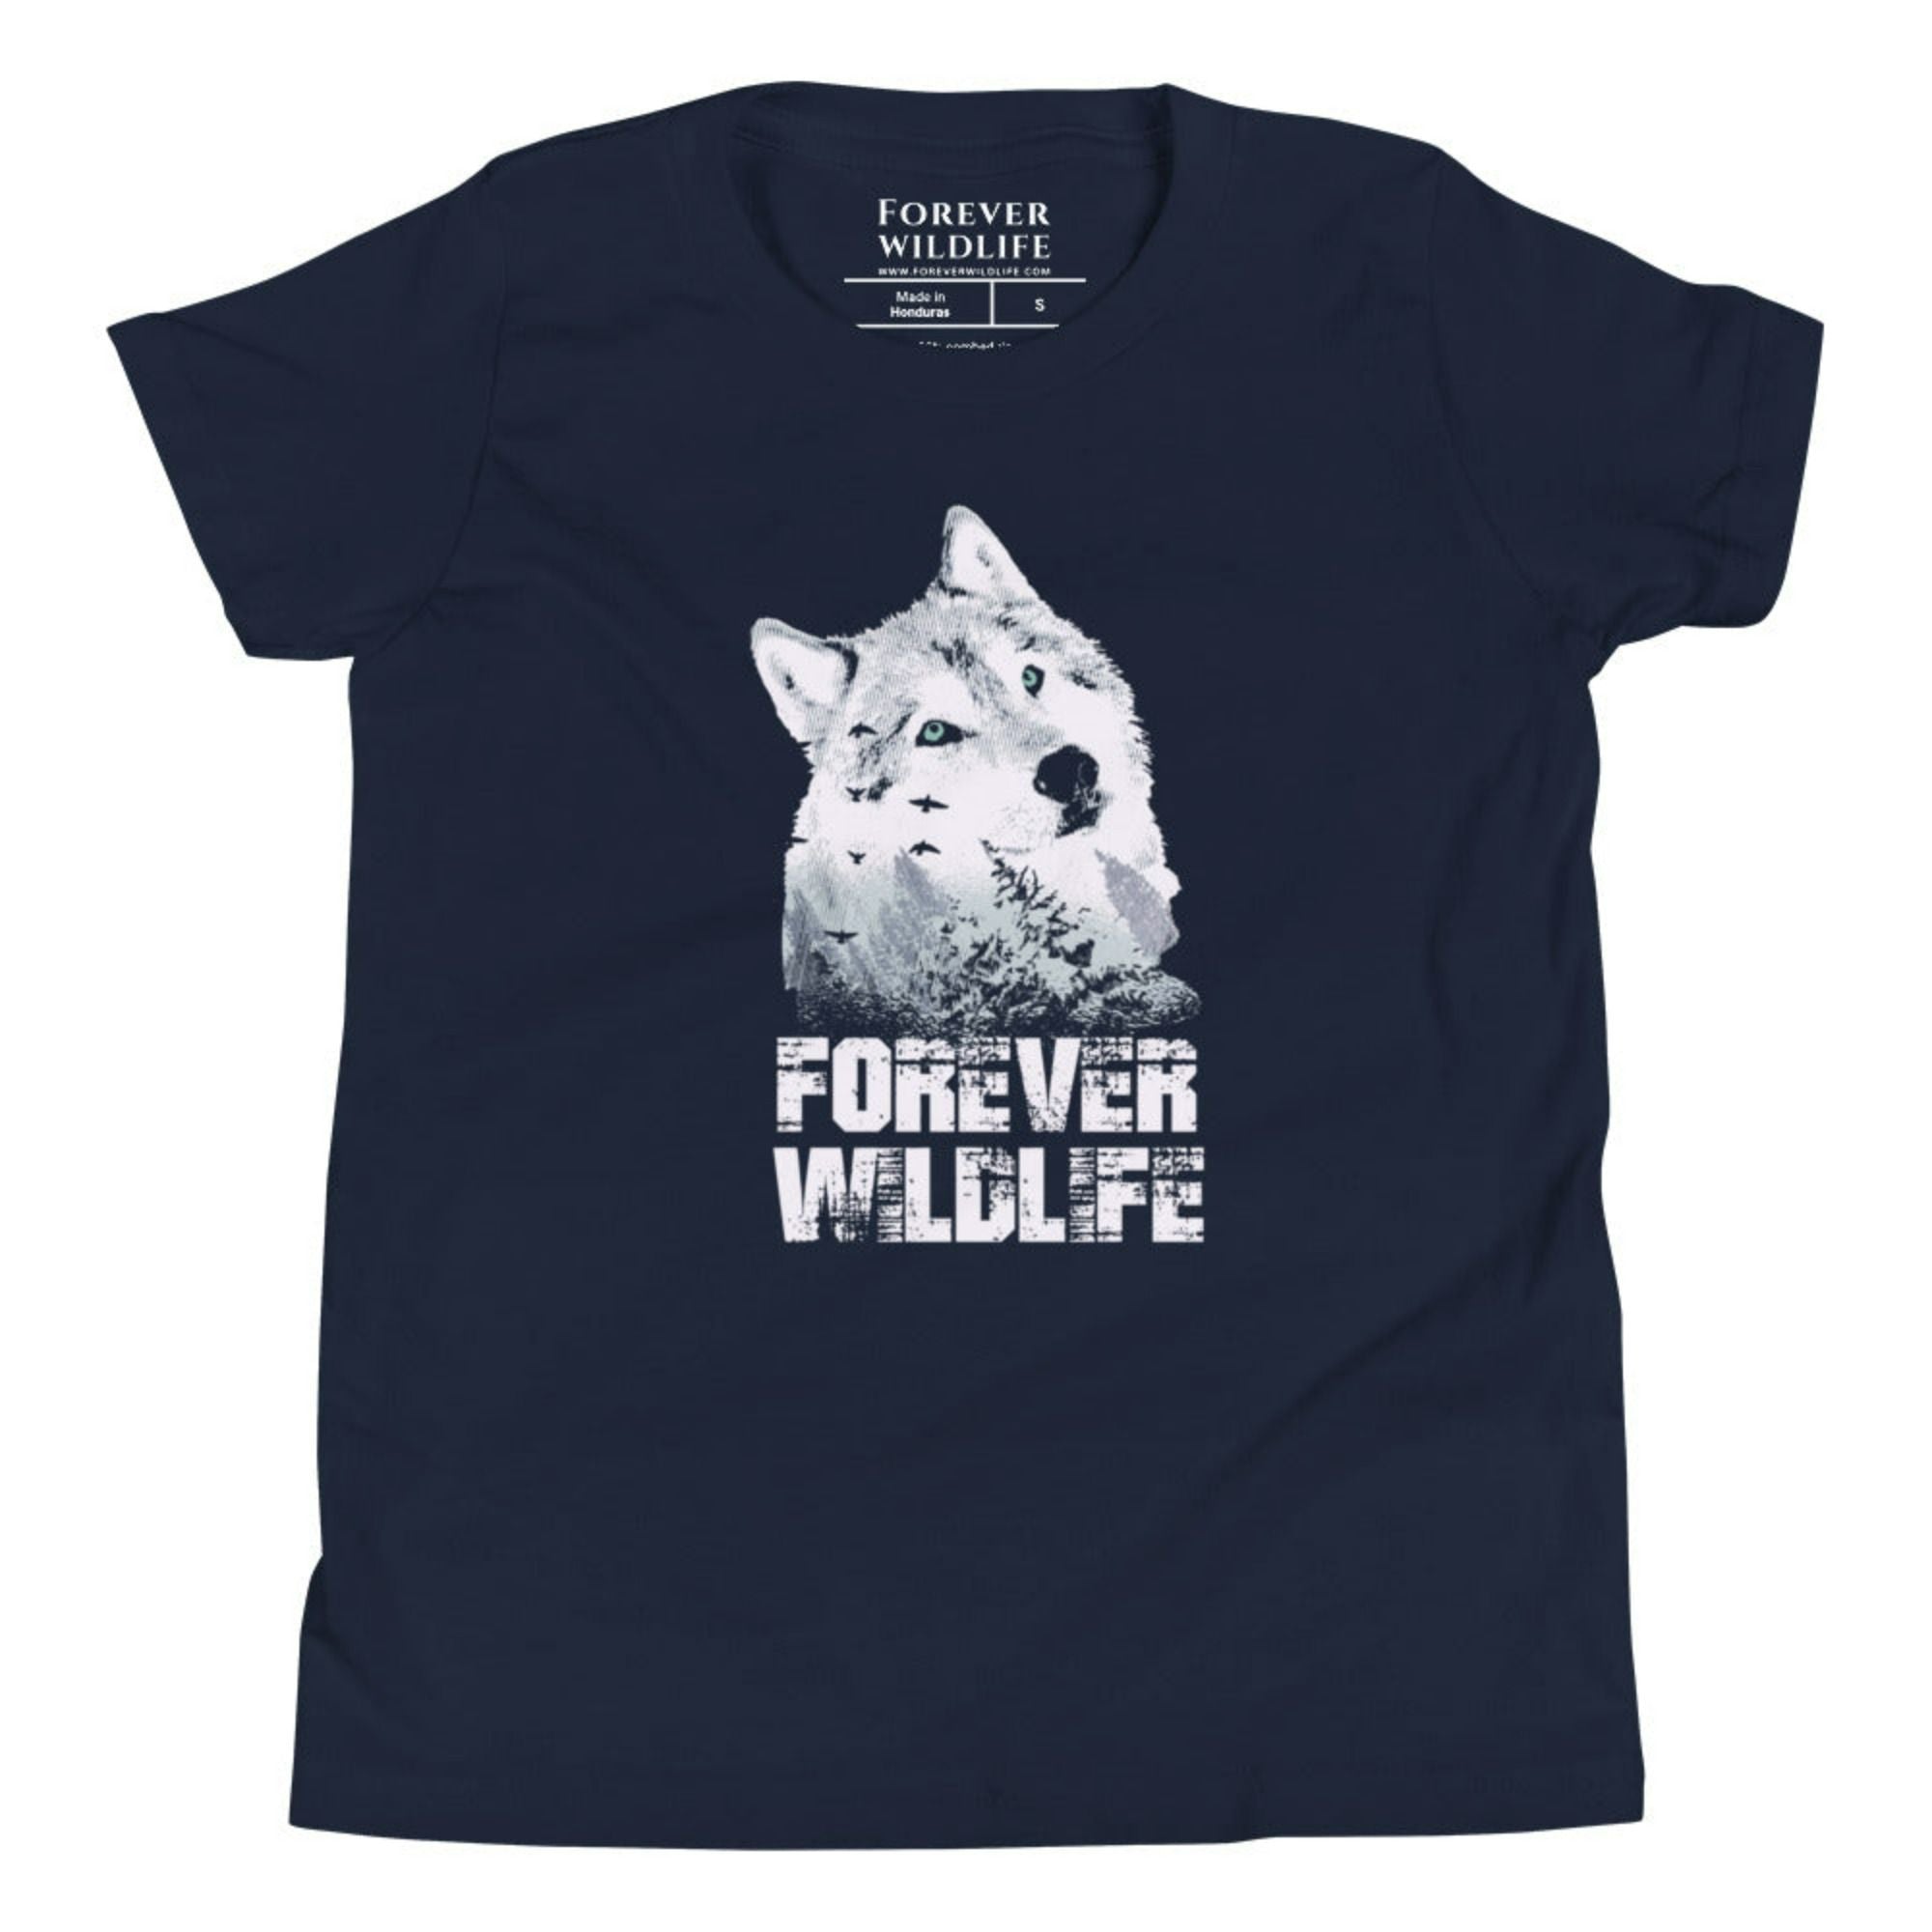 Navy Youth T-Shirt with Wolf graphic as part of Wildlife T-Shirts, Wildlife Clothing & Apparel by Forever Wildlife